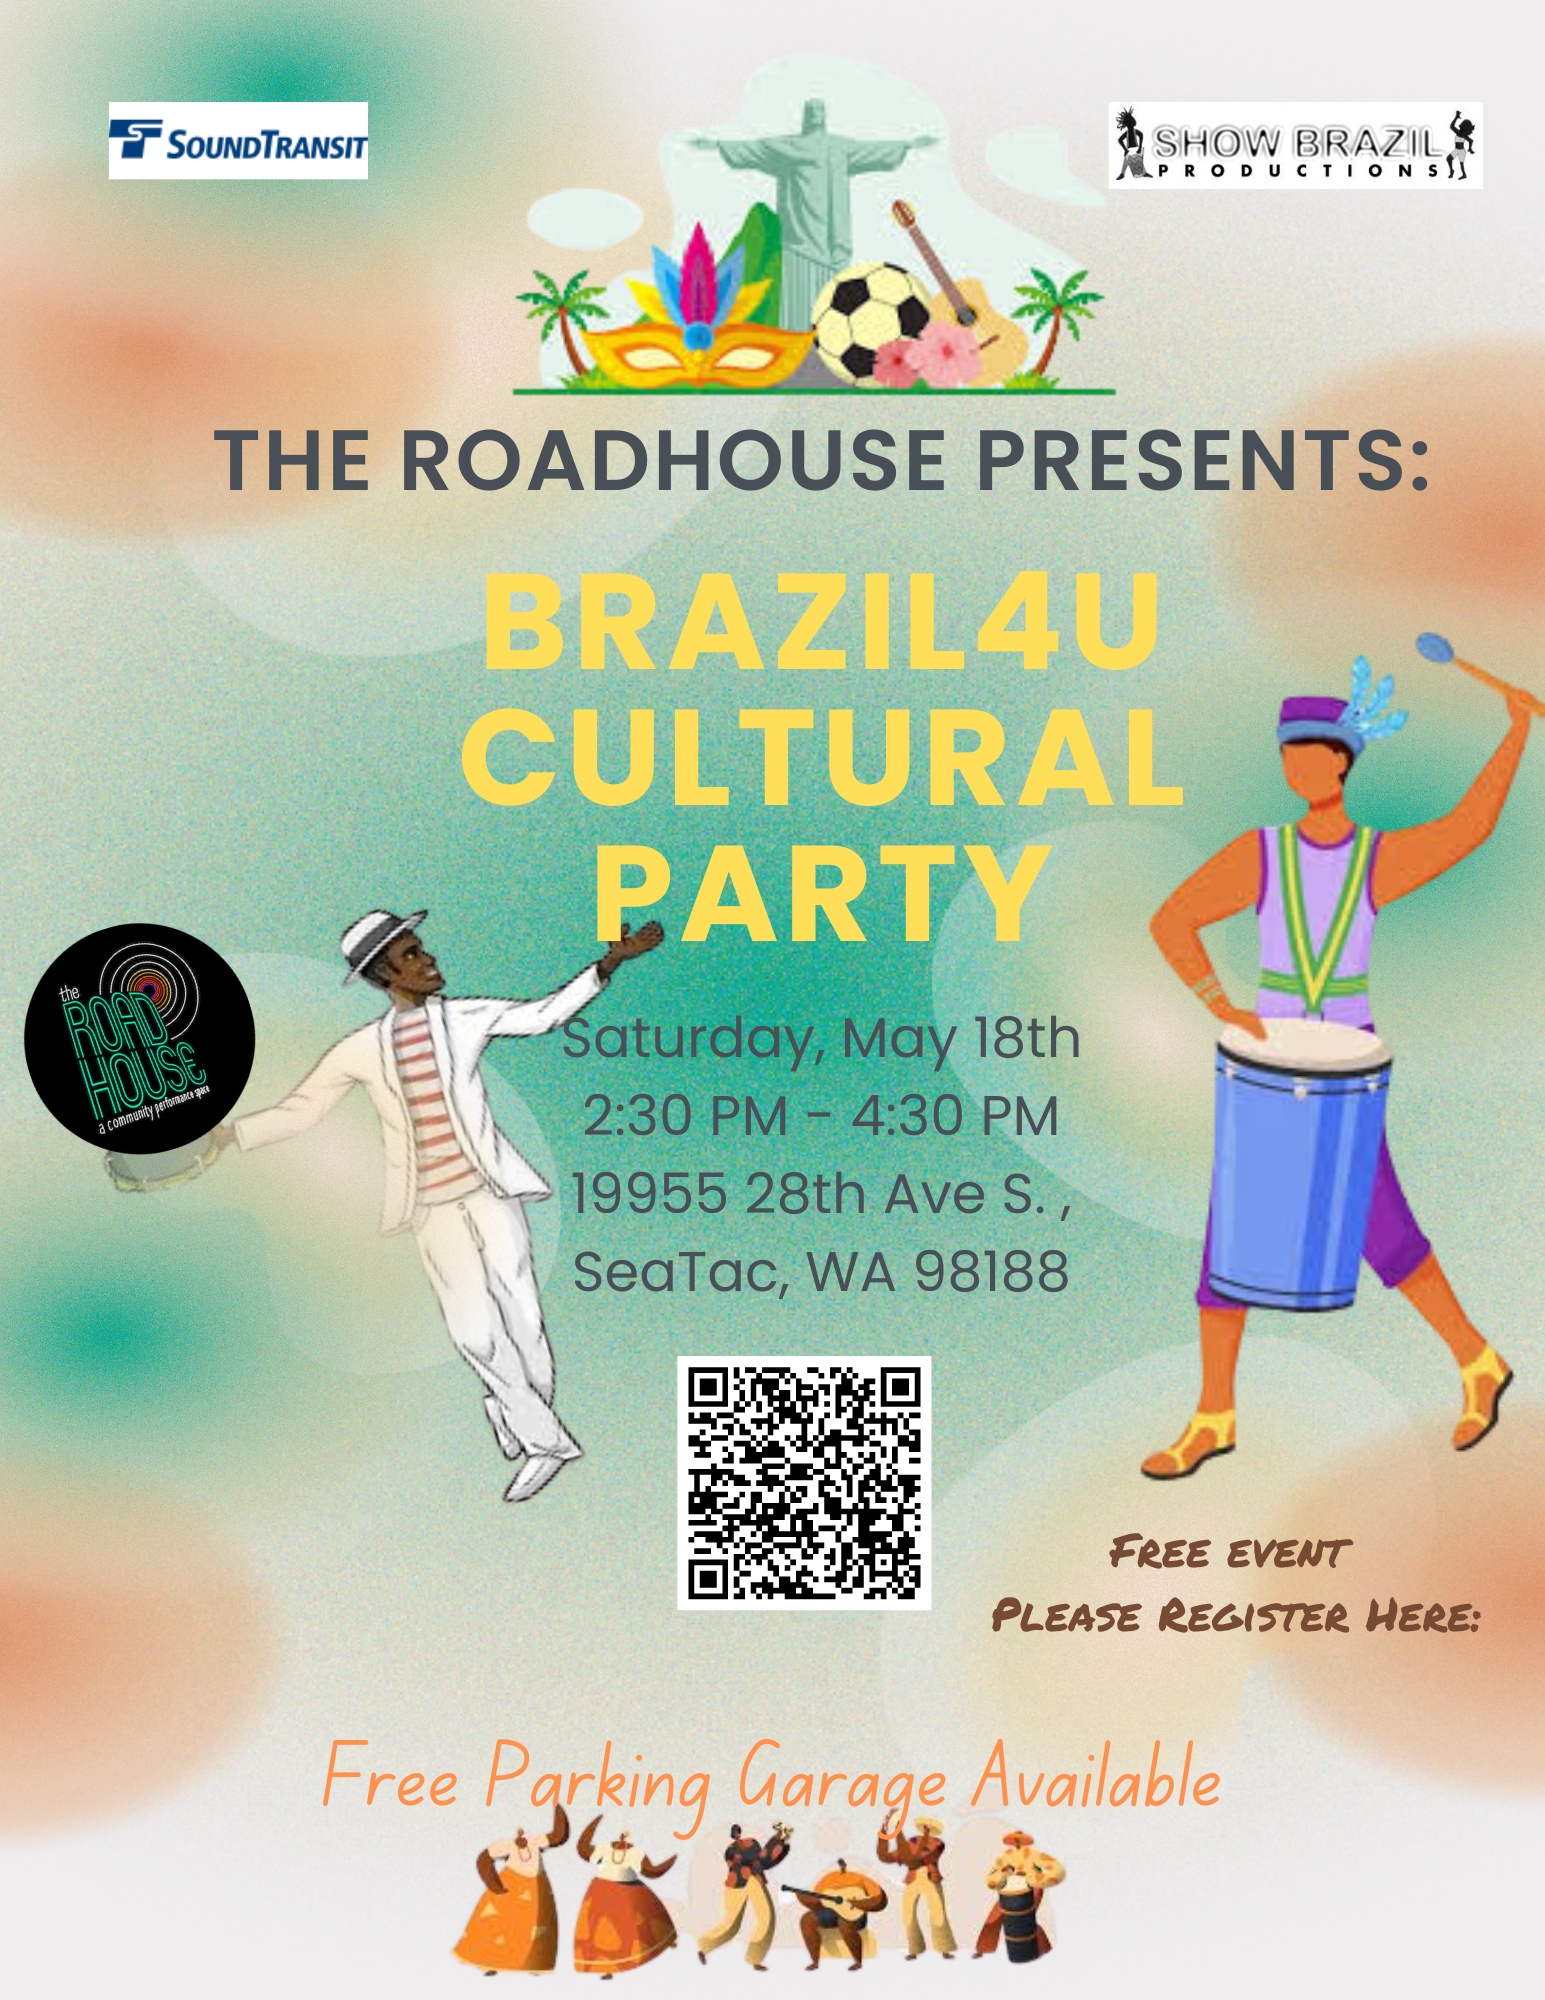 “The Sounds of the Roadhouse” Brazil 4U Cultural Party